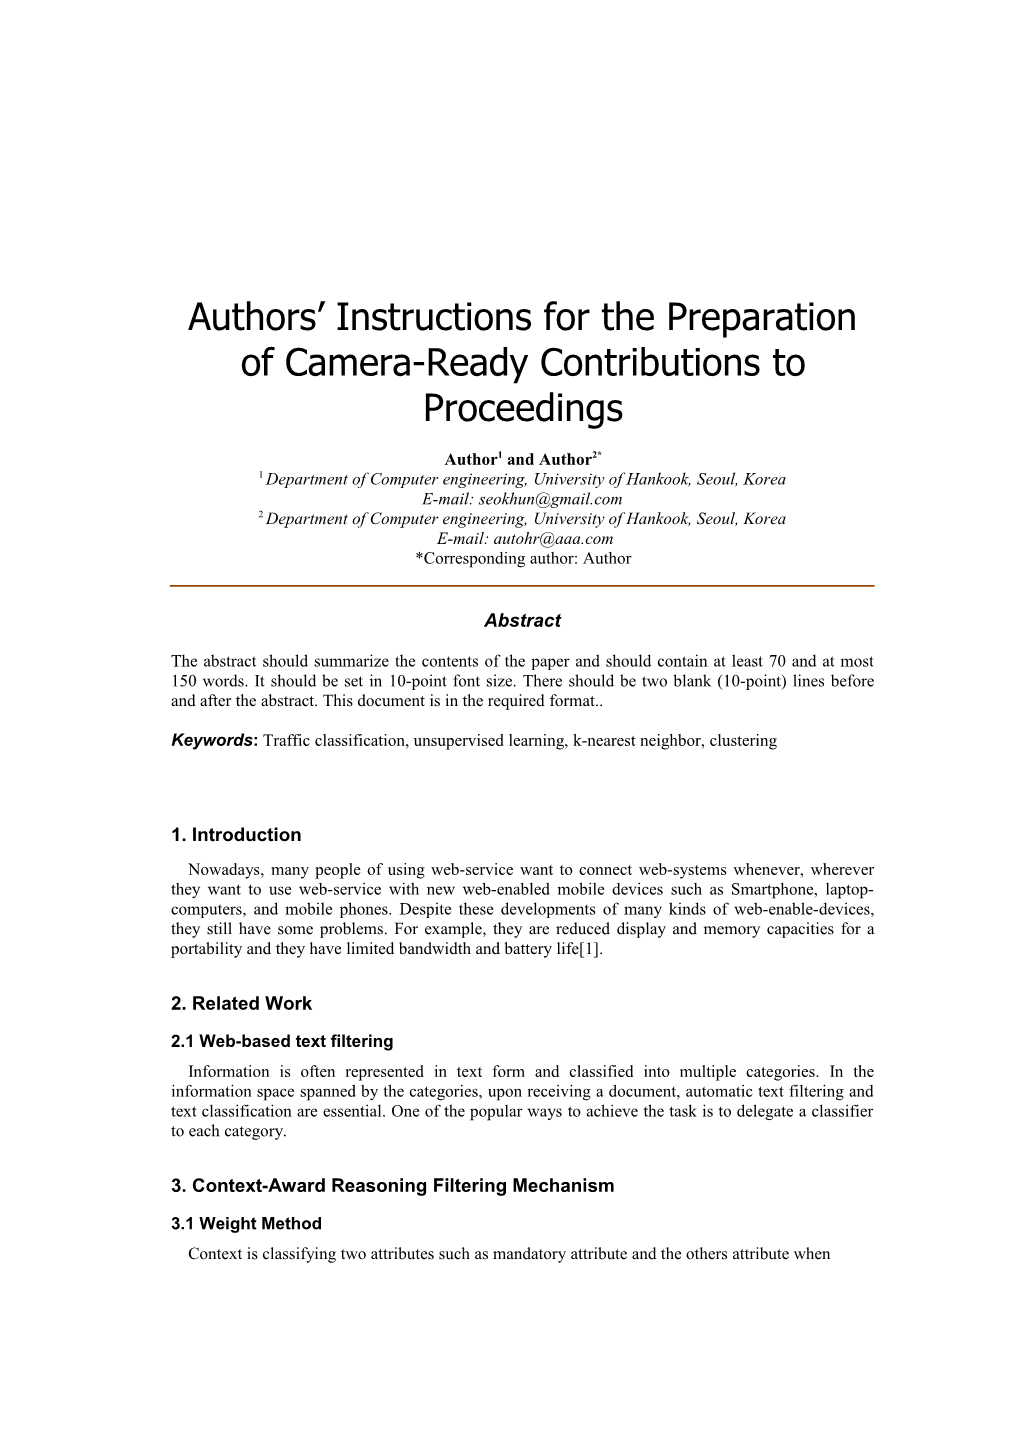 Authors Instructions for the Preparation of Camera-Ready Contributions to Proceedings